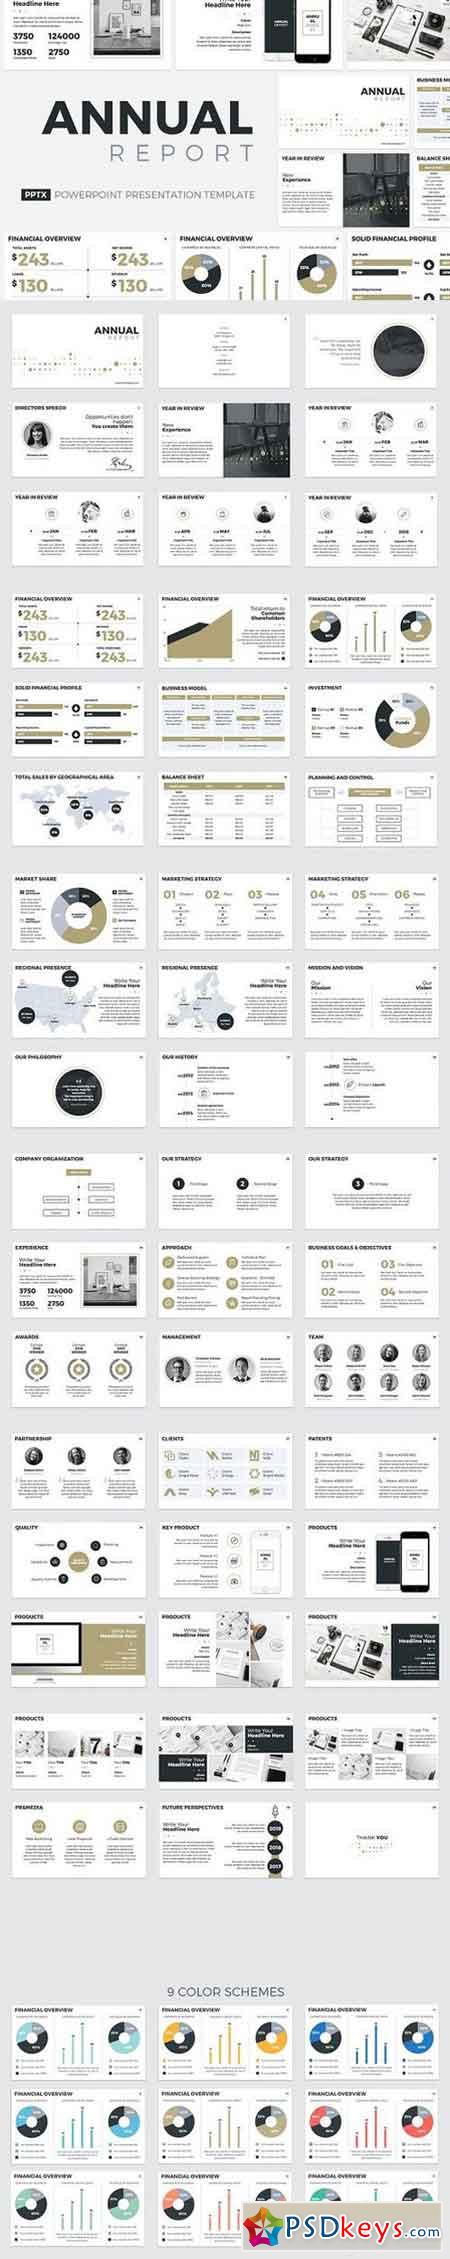 Annual Report PowerPoint Template 1373233